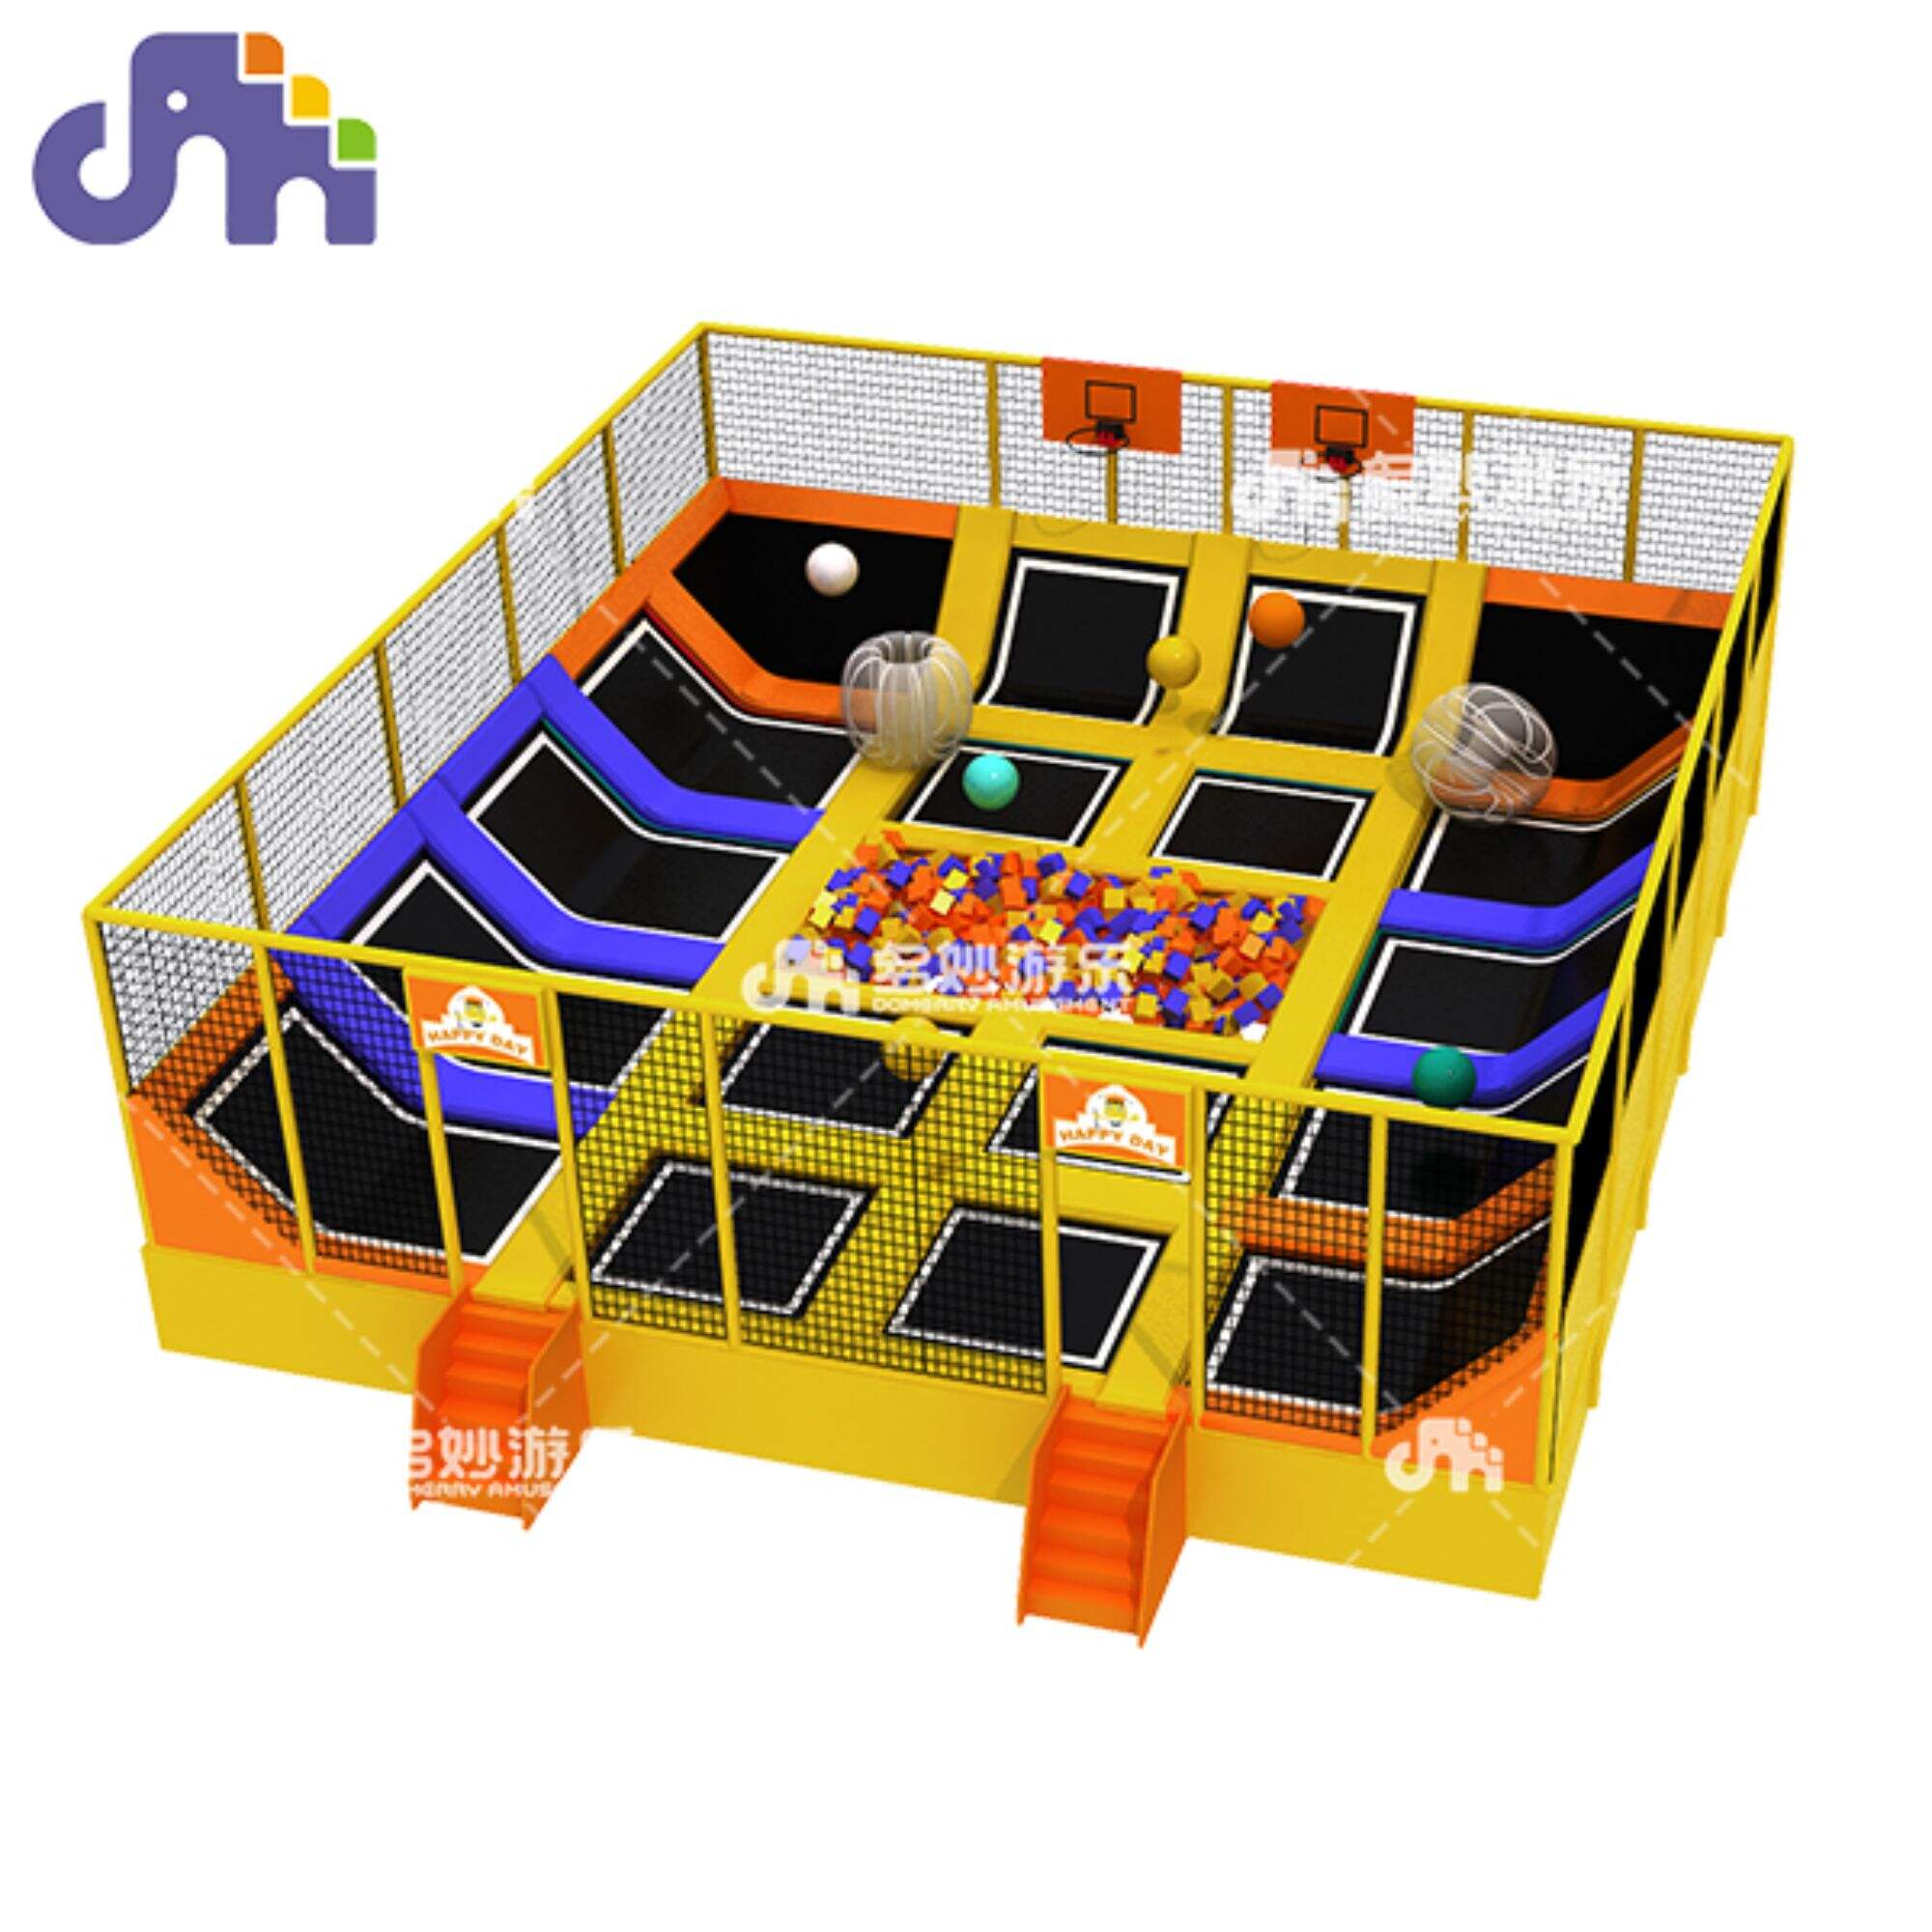 Kids' Amusement Park Trampoline Park Jumping Trampoline for Endless Fun and Active Play